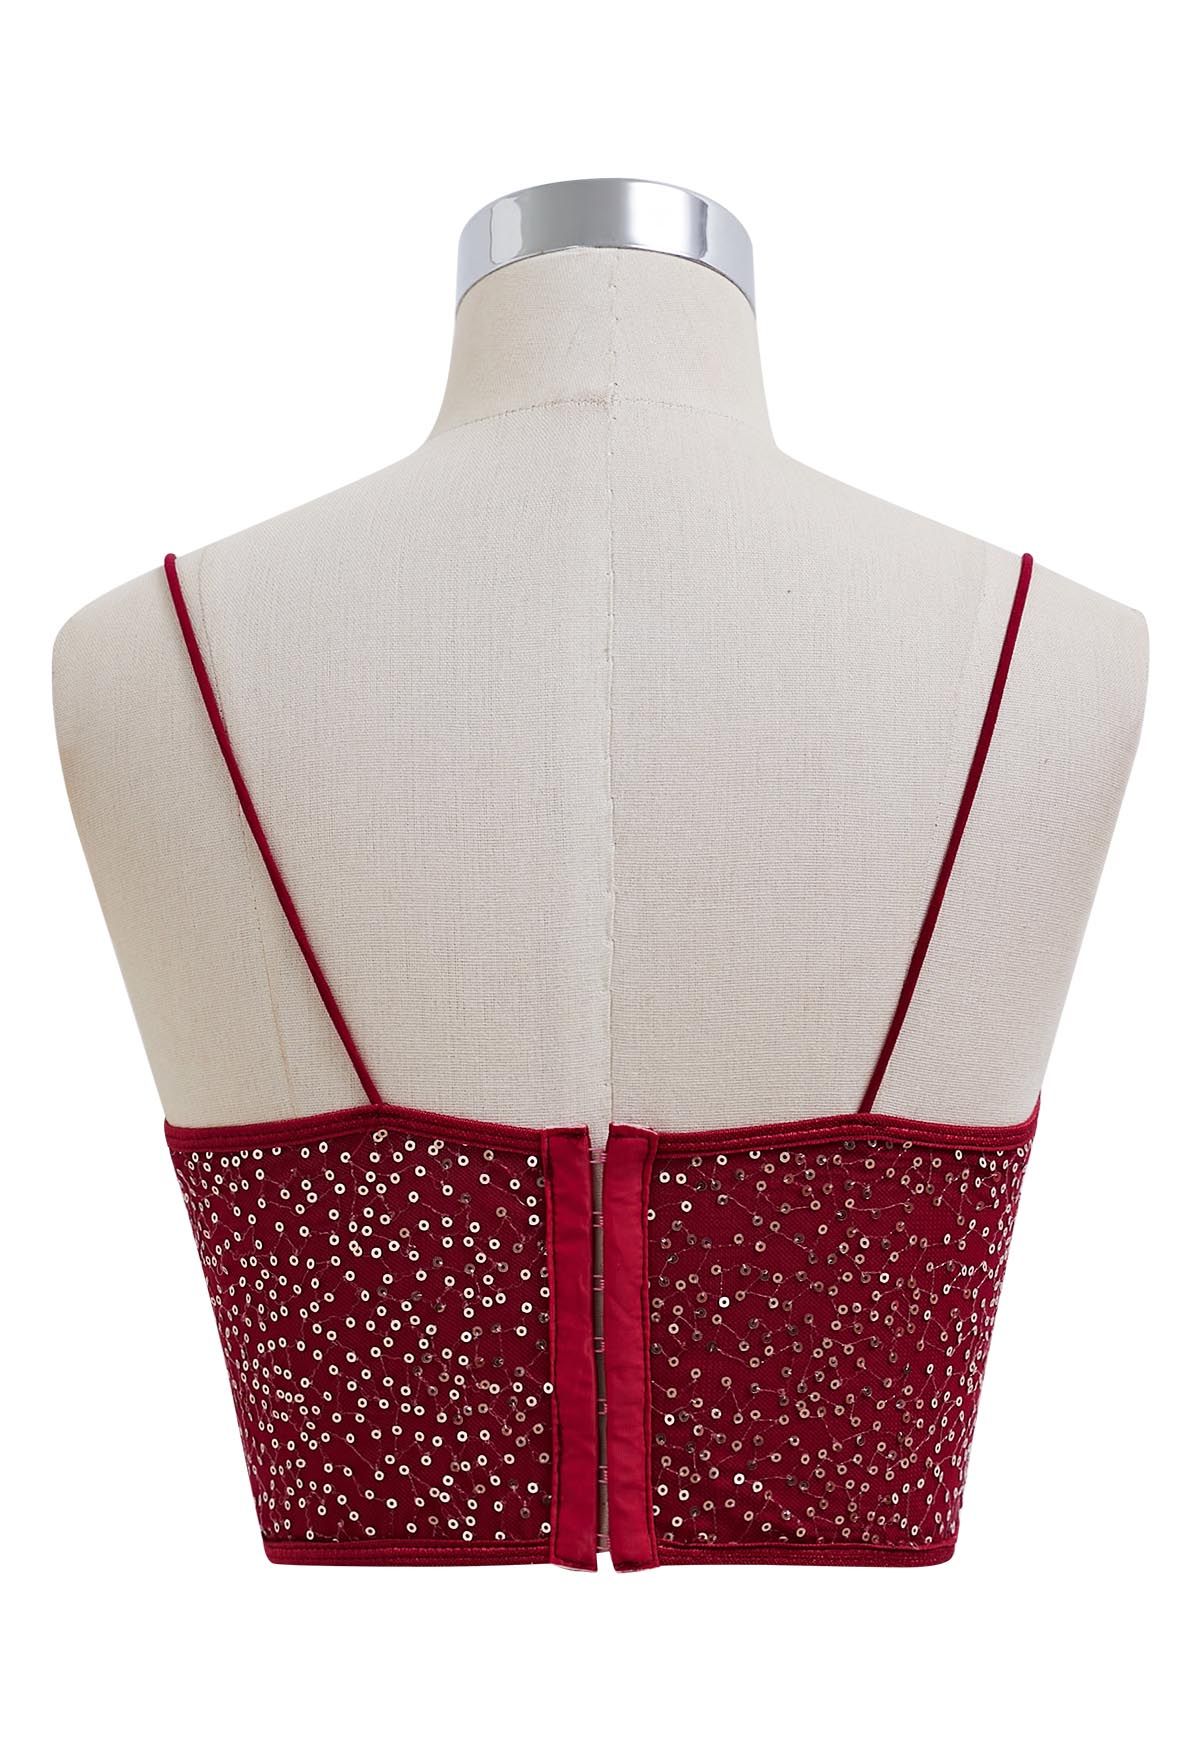 Sequin Embroidered Corset Bustier Top in Burgundy